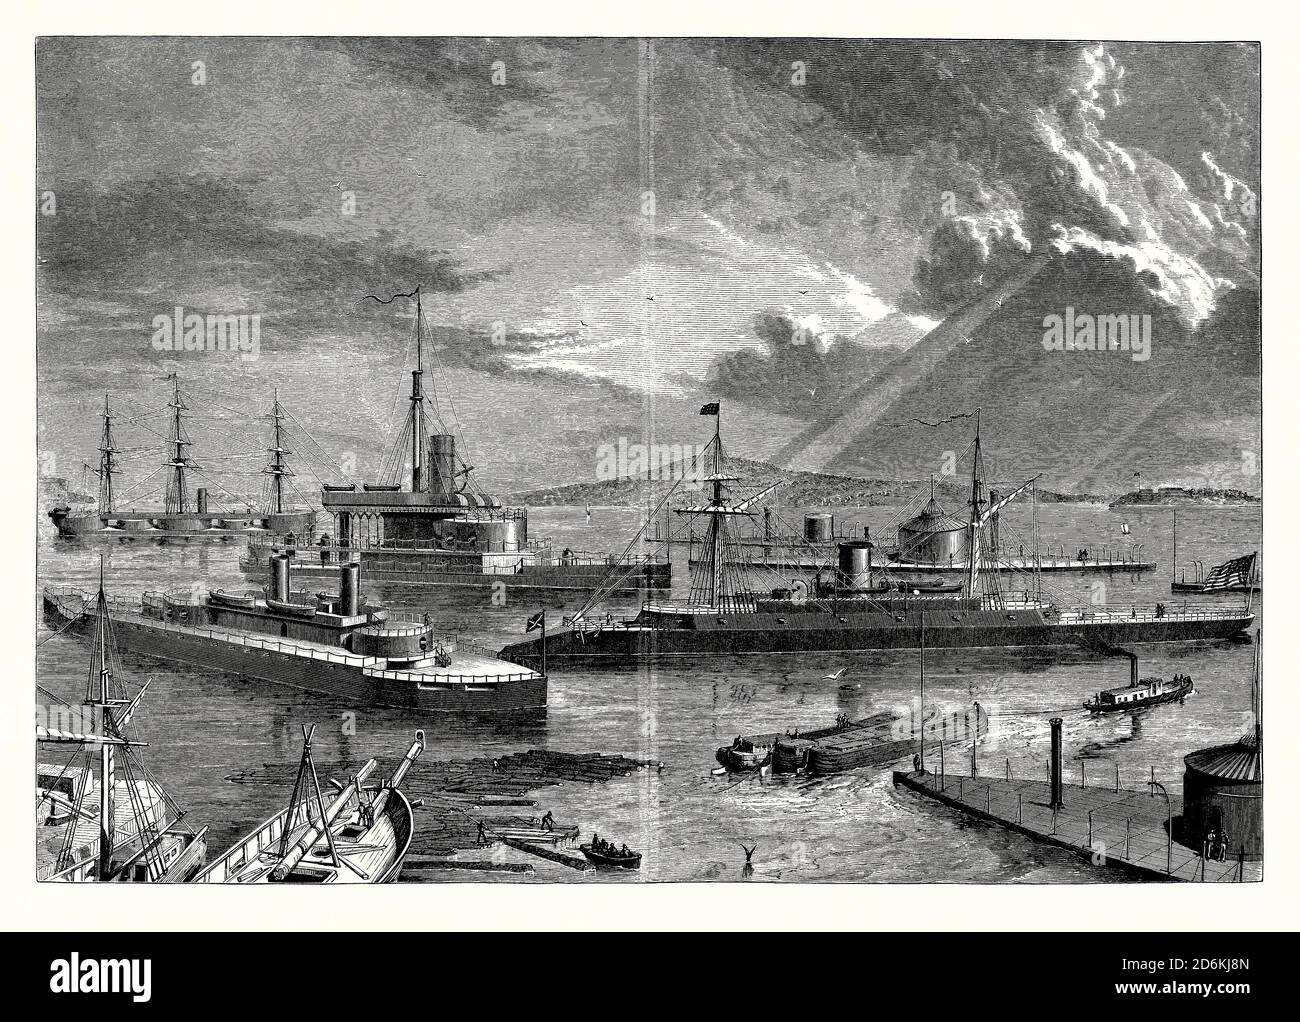 An old engraving showing the various types of armour-plated, iron-clad warships of the British and American navies that were afloat in the 1870s. It is from a Victorian mechanical engineering book of the 1880s. Those vessels illustrated include HMS Captain (left background, built 1869), HMS Thunderer (left foreground, built 1872), HMS Glatton (centre left, built 1871) and USS Dunderberg (centre right, built 1865). US navy Monitors are shown rear right and foreground right. Some ships were powered by both steam and sail, others were solely steam-powered. Stock Photo